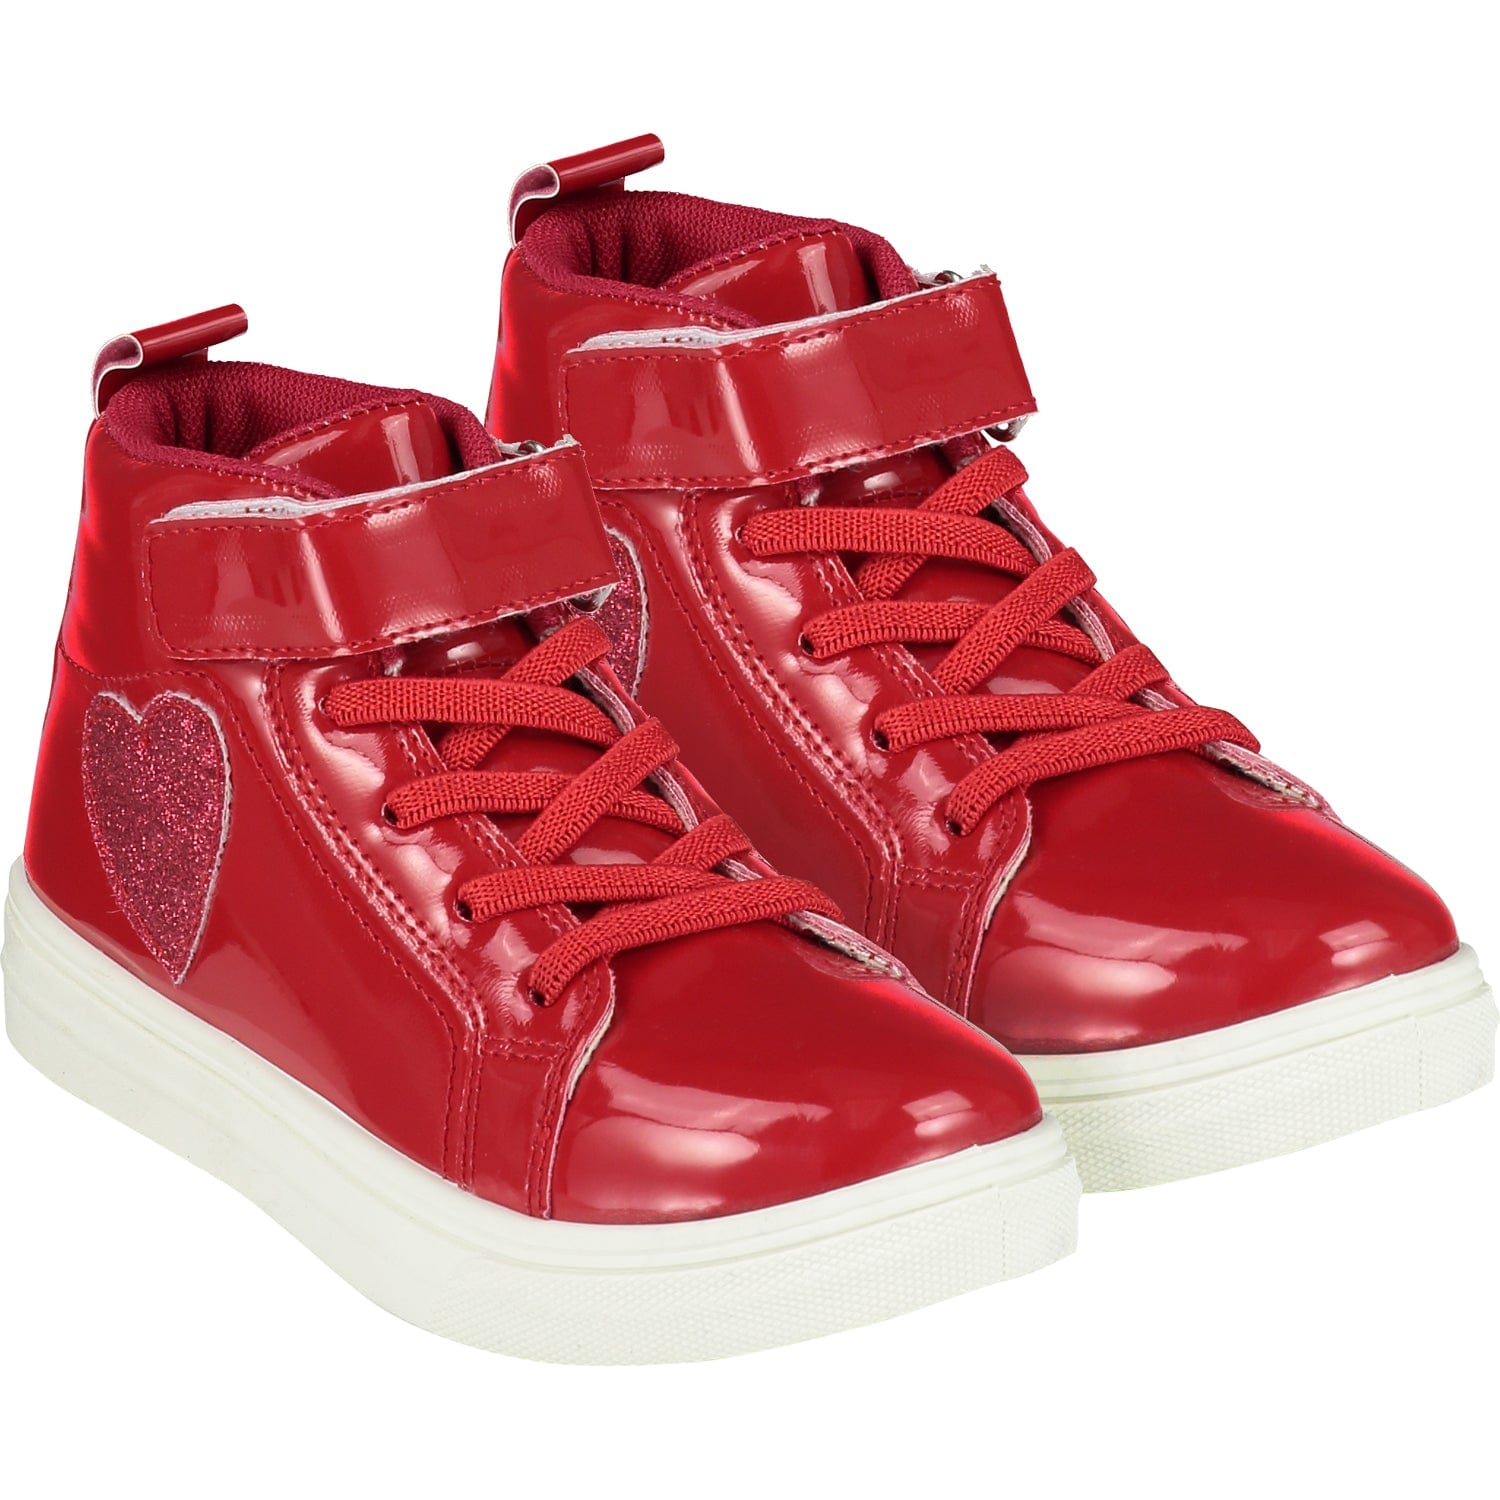 A DEE - Sweetheart Glitter High Top Trainers - Red